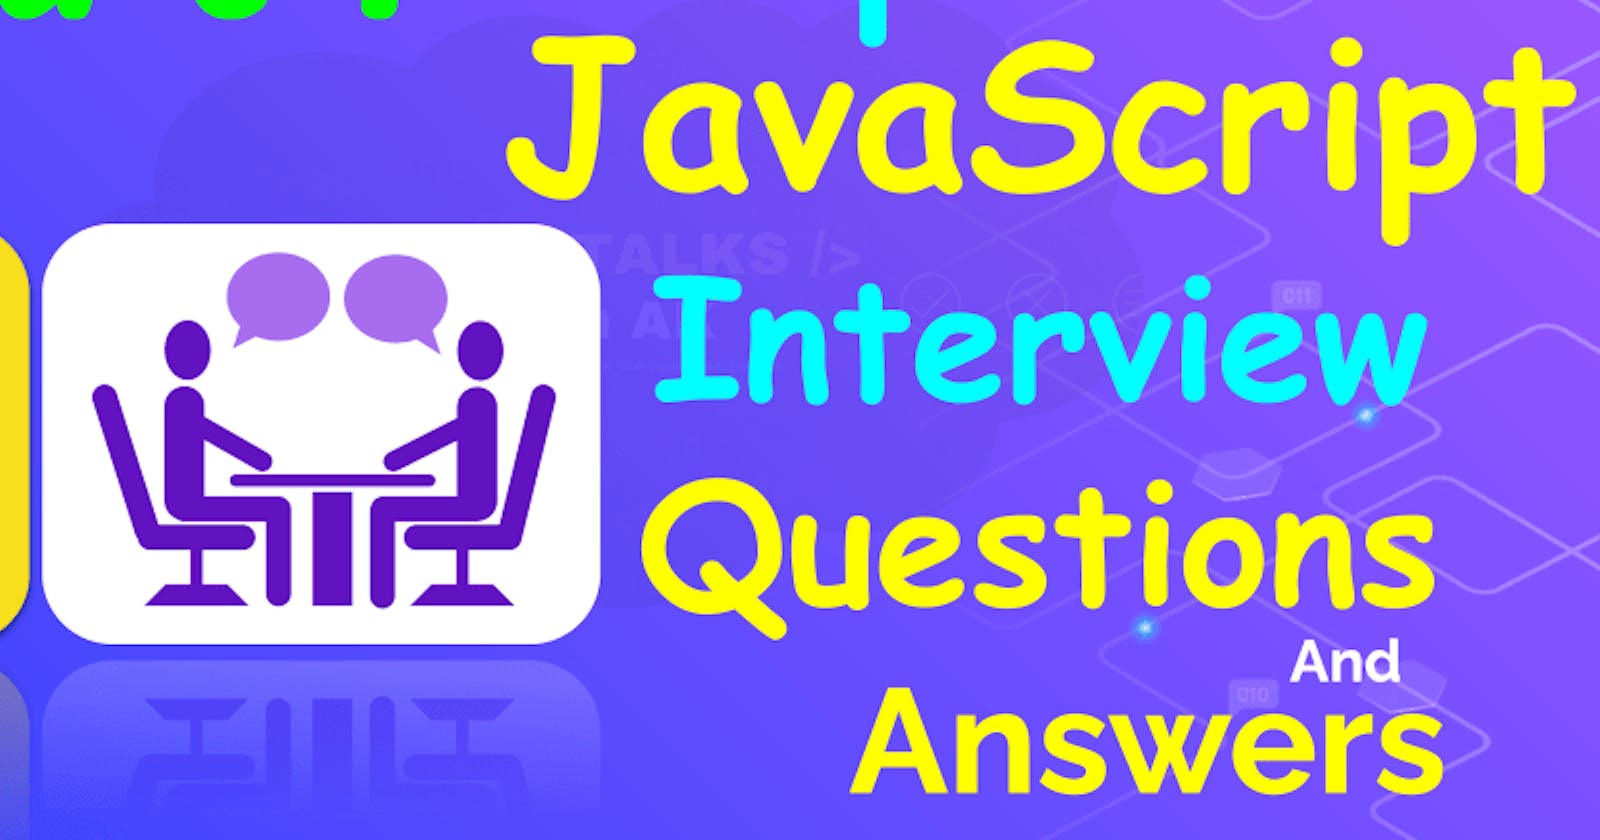 100 most asked JavaScript Interview Questions and Answers